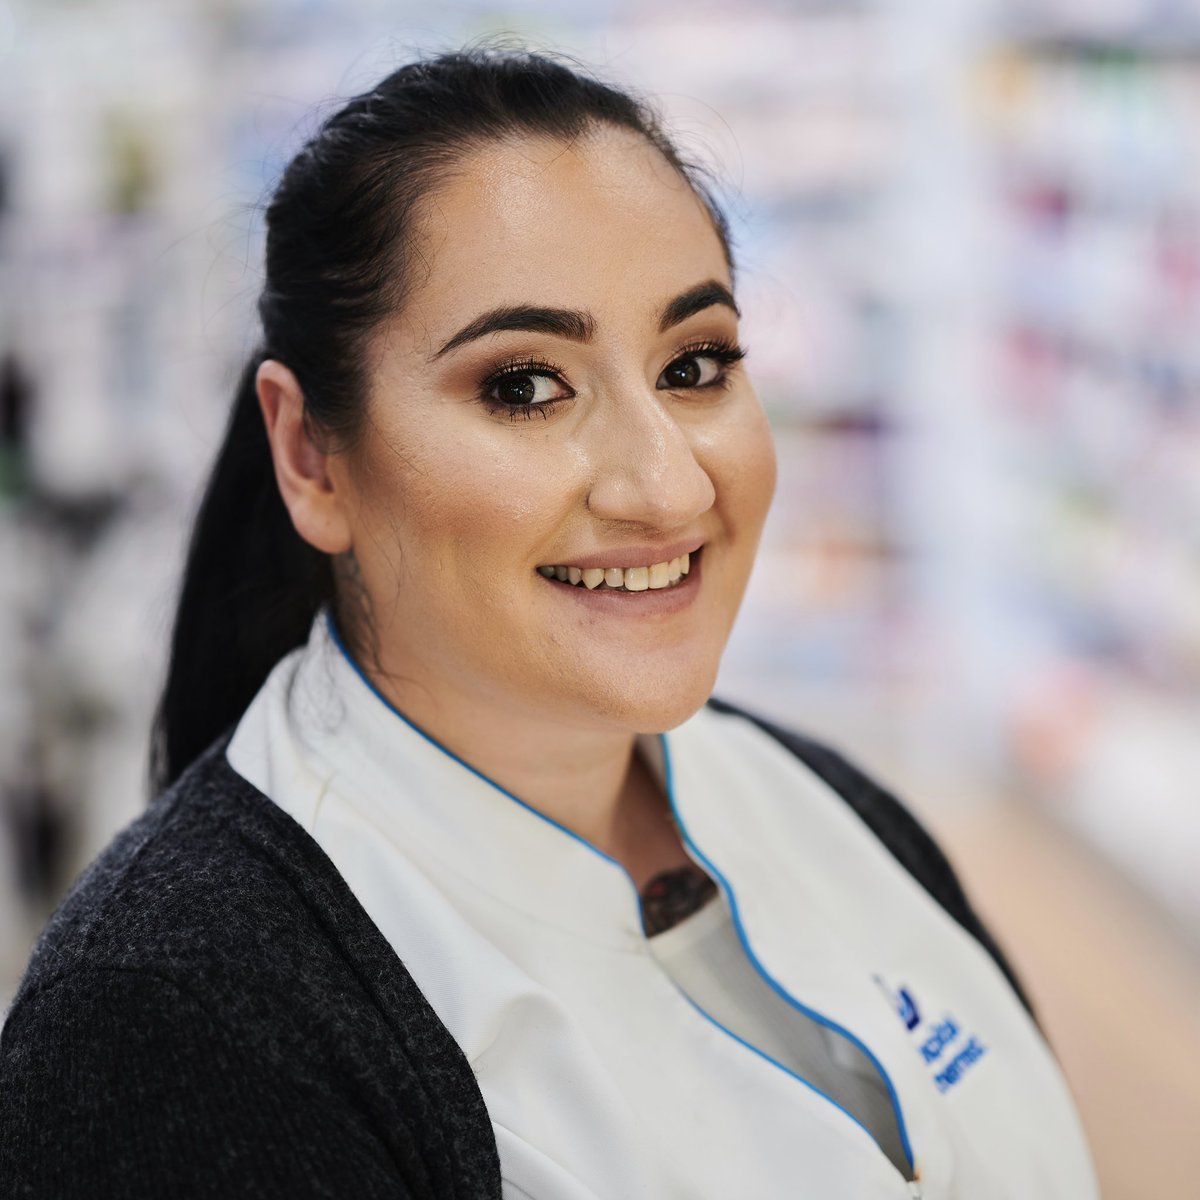 Capital Chemist Southlands in Mawson is 1 of 15 pharmacies in the ACT who have joined a trial to treat uncomplicated UTIs in women and provide a resupply of the oral contraceptive pill ℹ️ health.act.gov.au/pharmacy-trial 📸 Marjan Seyedi, Managing Partner at Capital Chemist Southlands